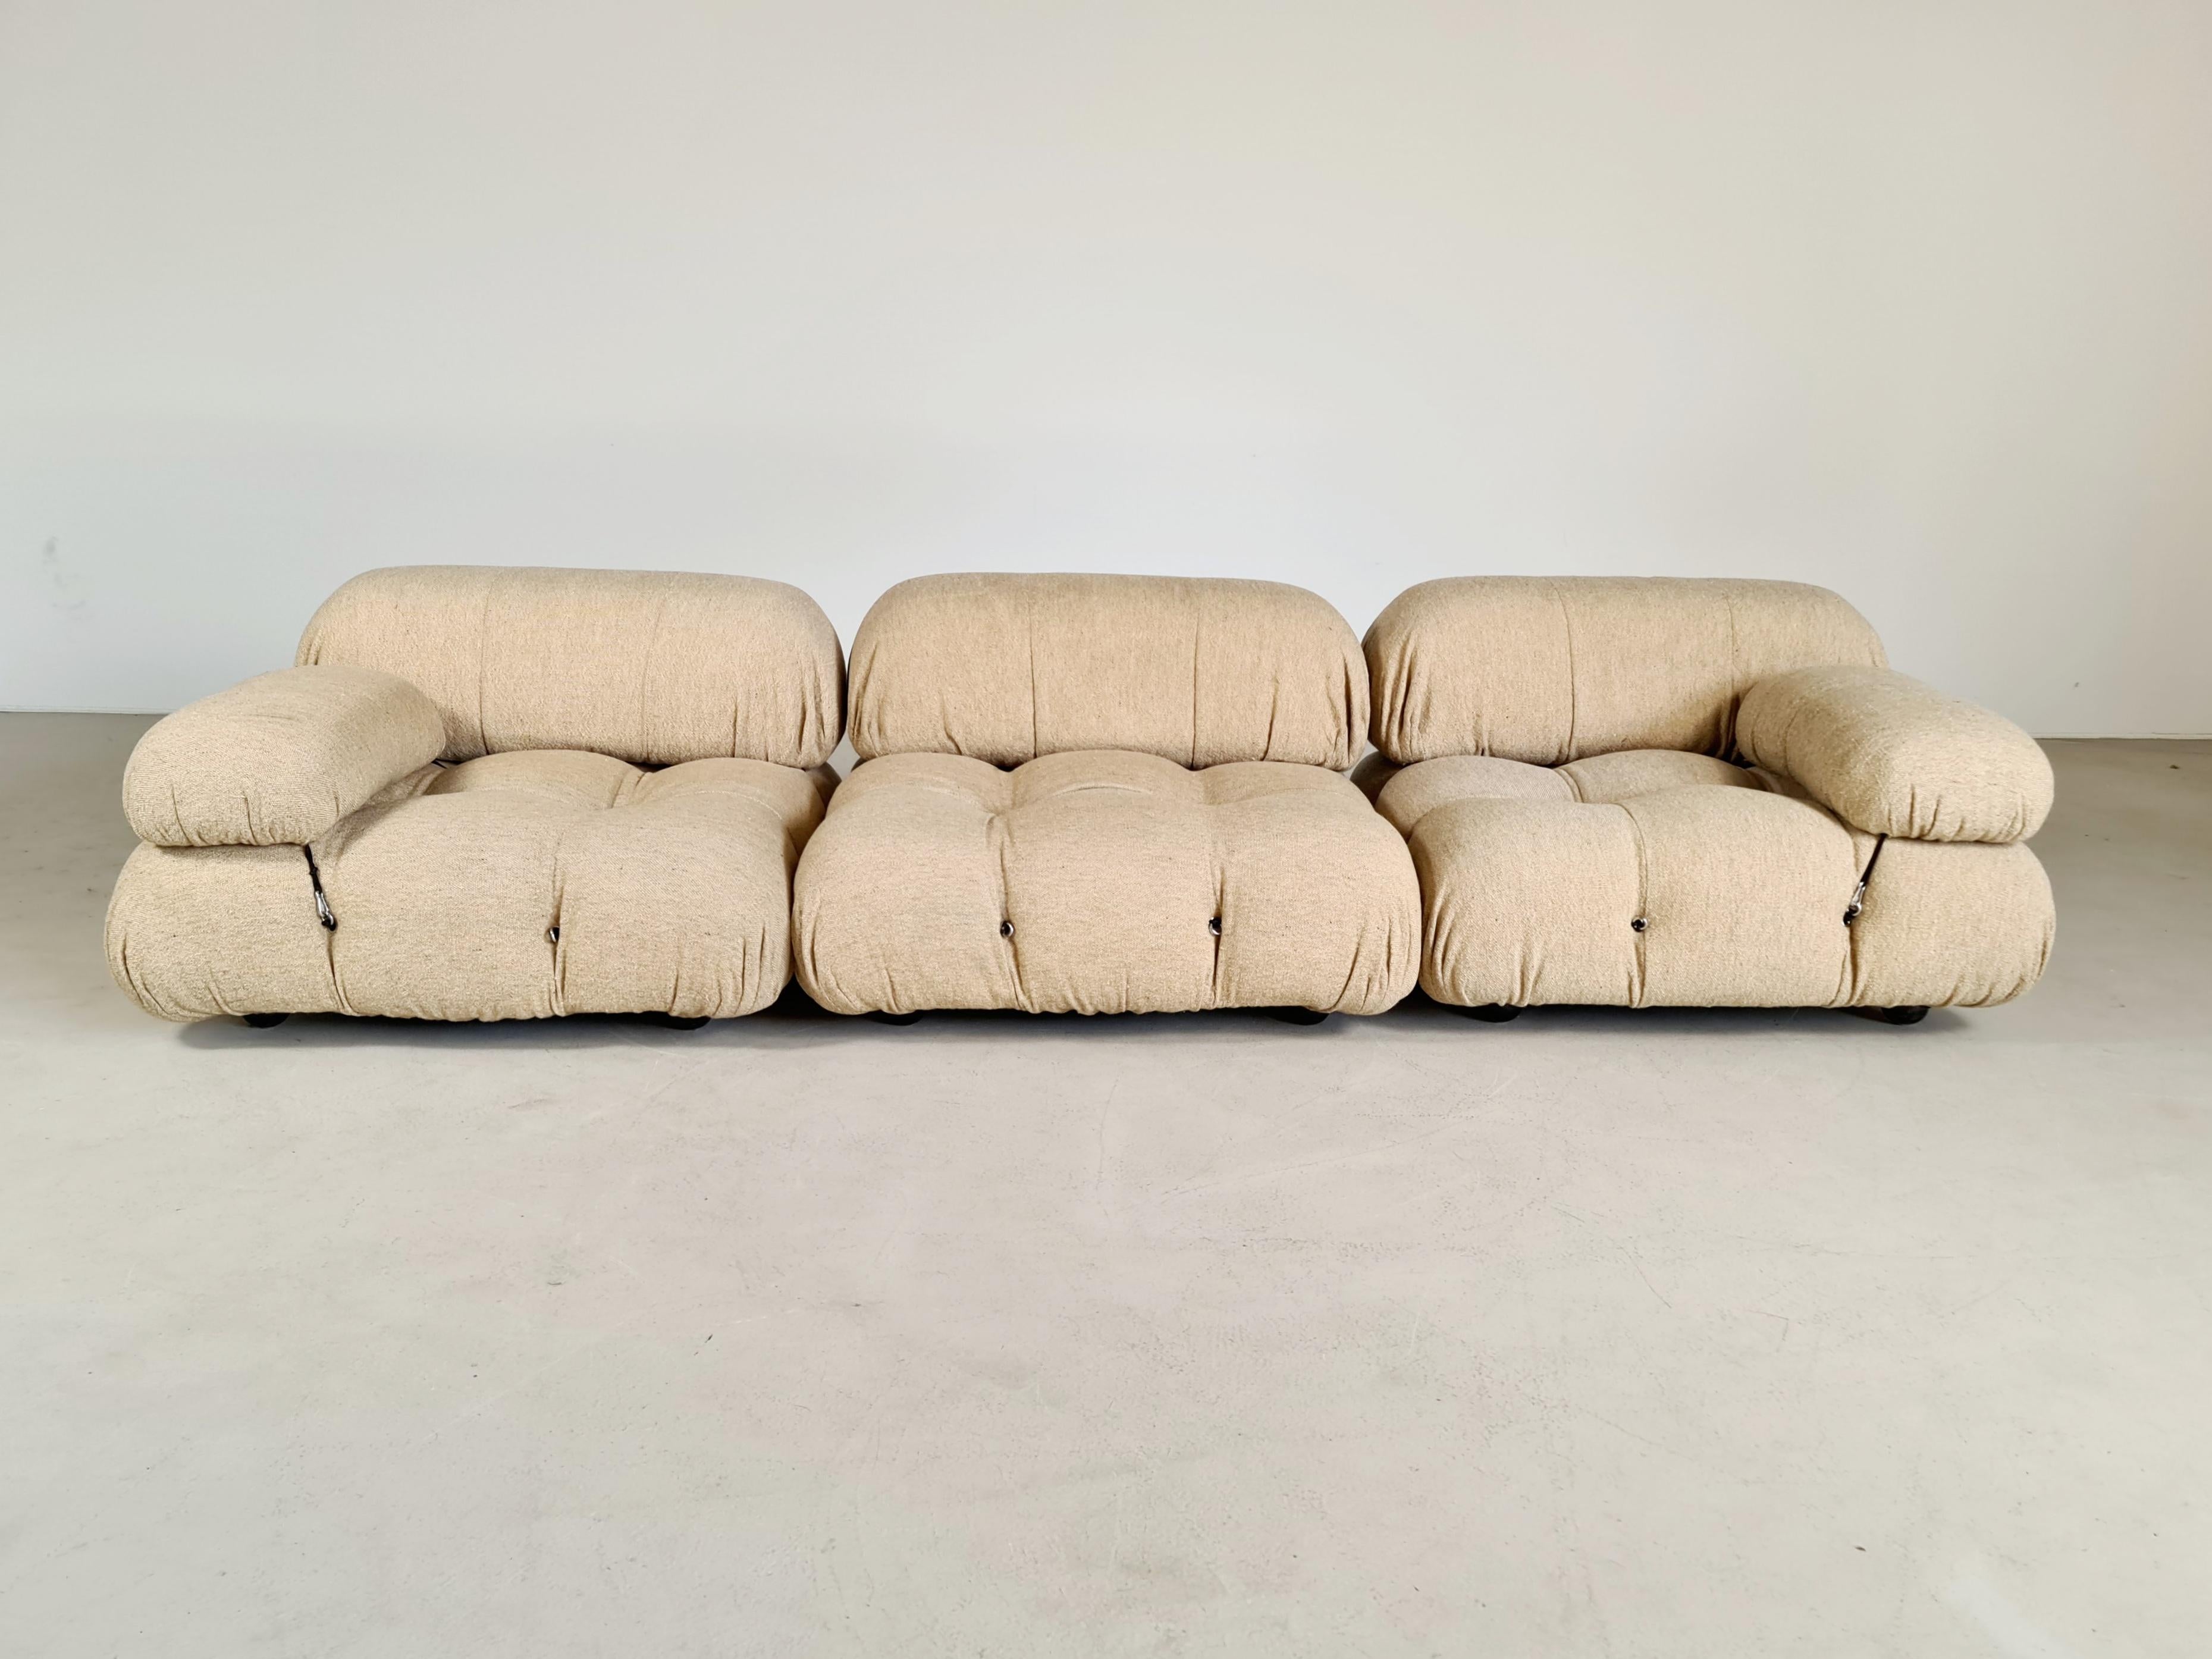 Mario Bellini Camaleonda sofa from the 1970s.
The sectional elements of this sofa can be used freely and apart from one another. Because the sofa is modular and backs and armrests are provided with rings and carabiners, you can create many